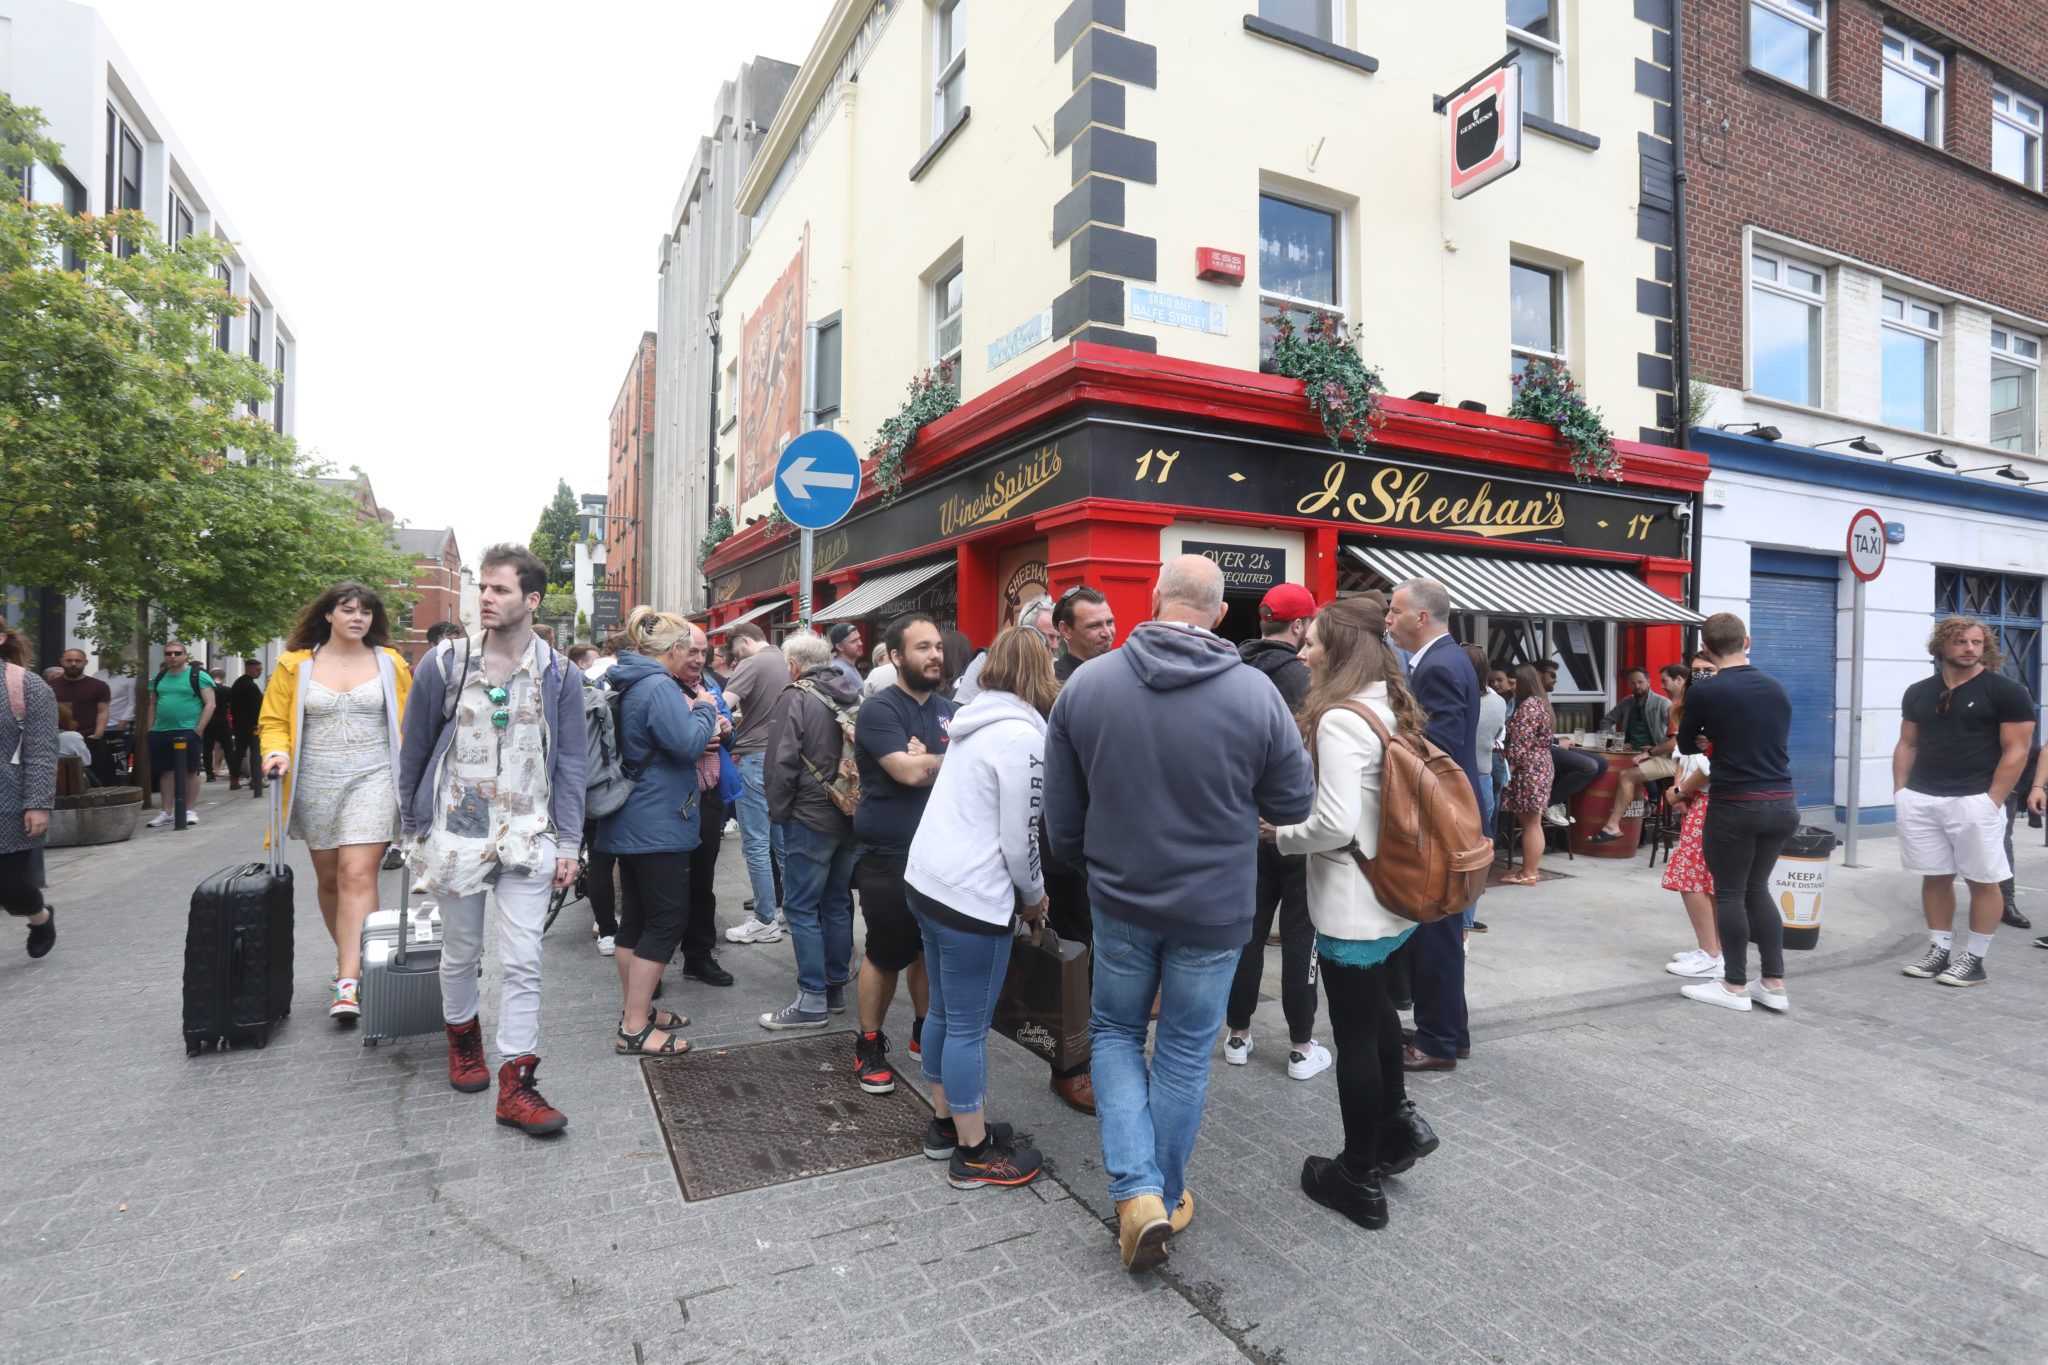 People enjoying outdoor dining in good weather on Chatham Street, Dublin, 10-07-2020. Image: Leah Farrell/RollingNews